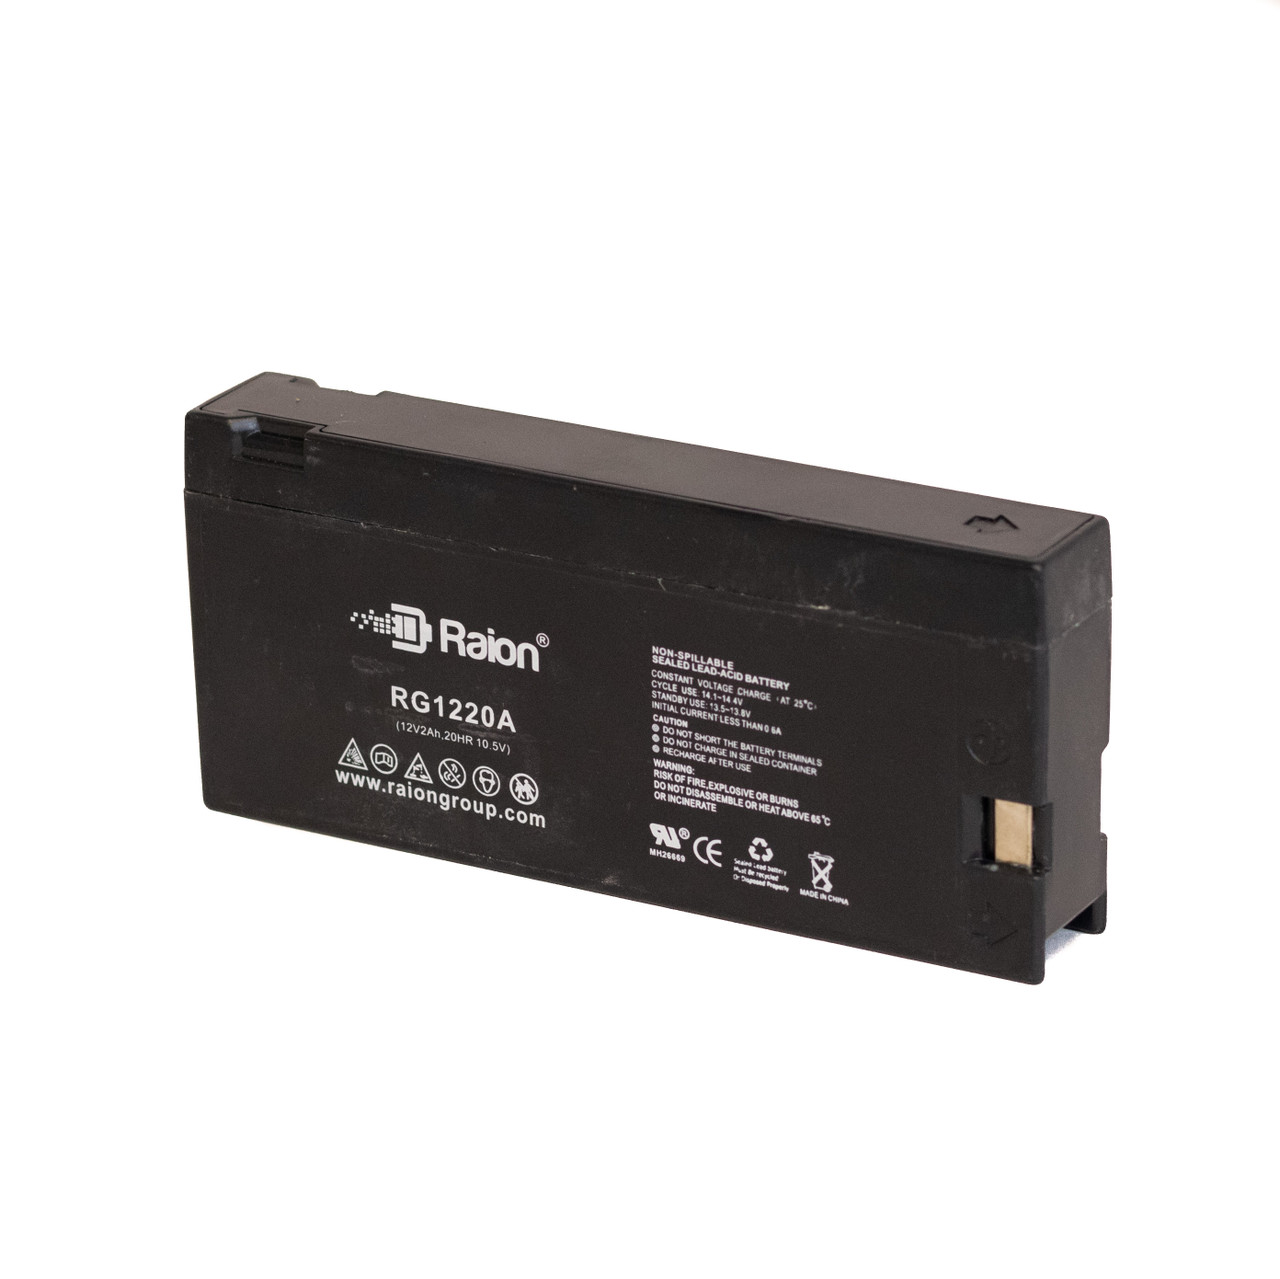 Raion Power RG1220A Replacement Battery for Magnavox CVK-322